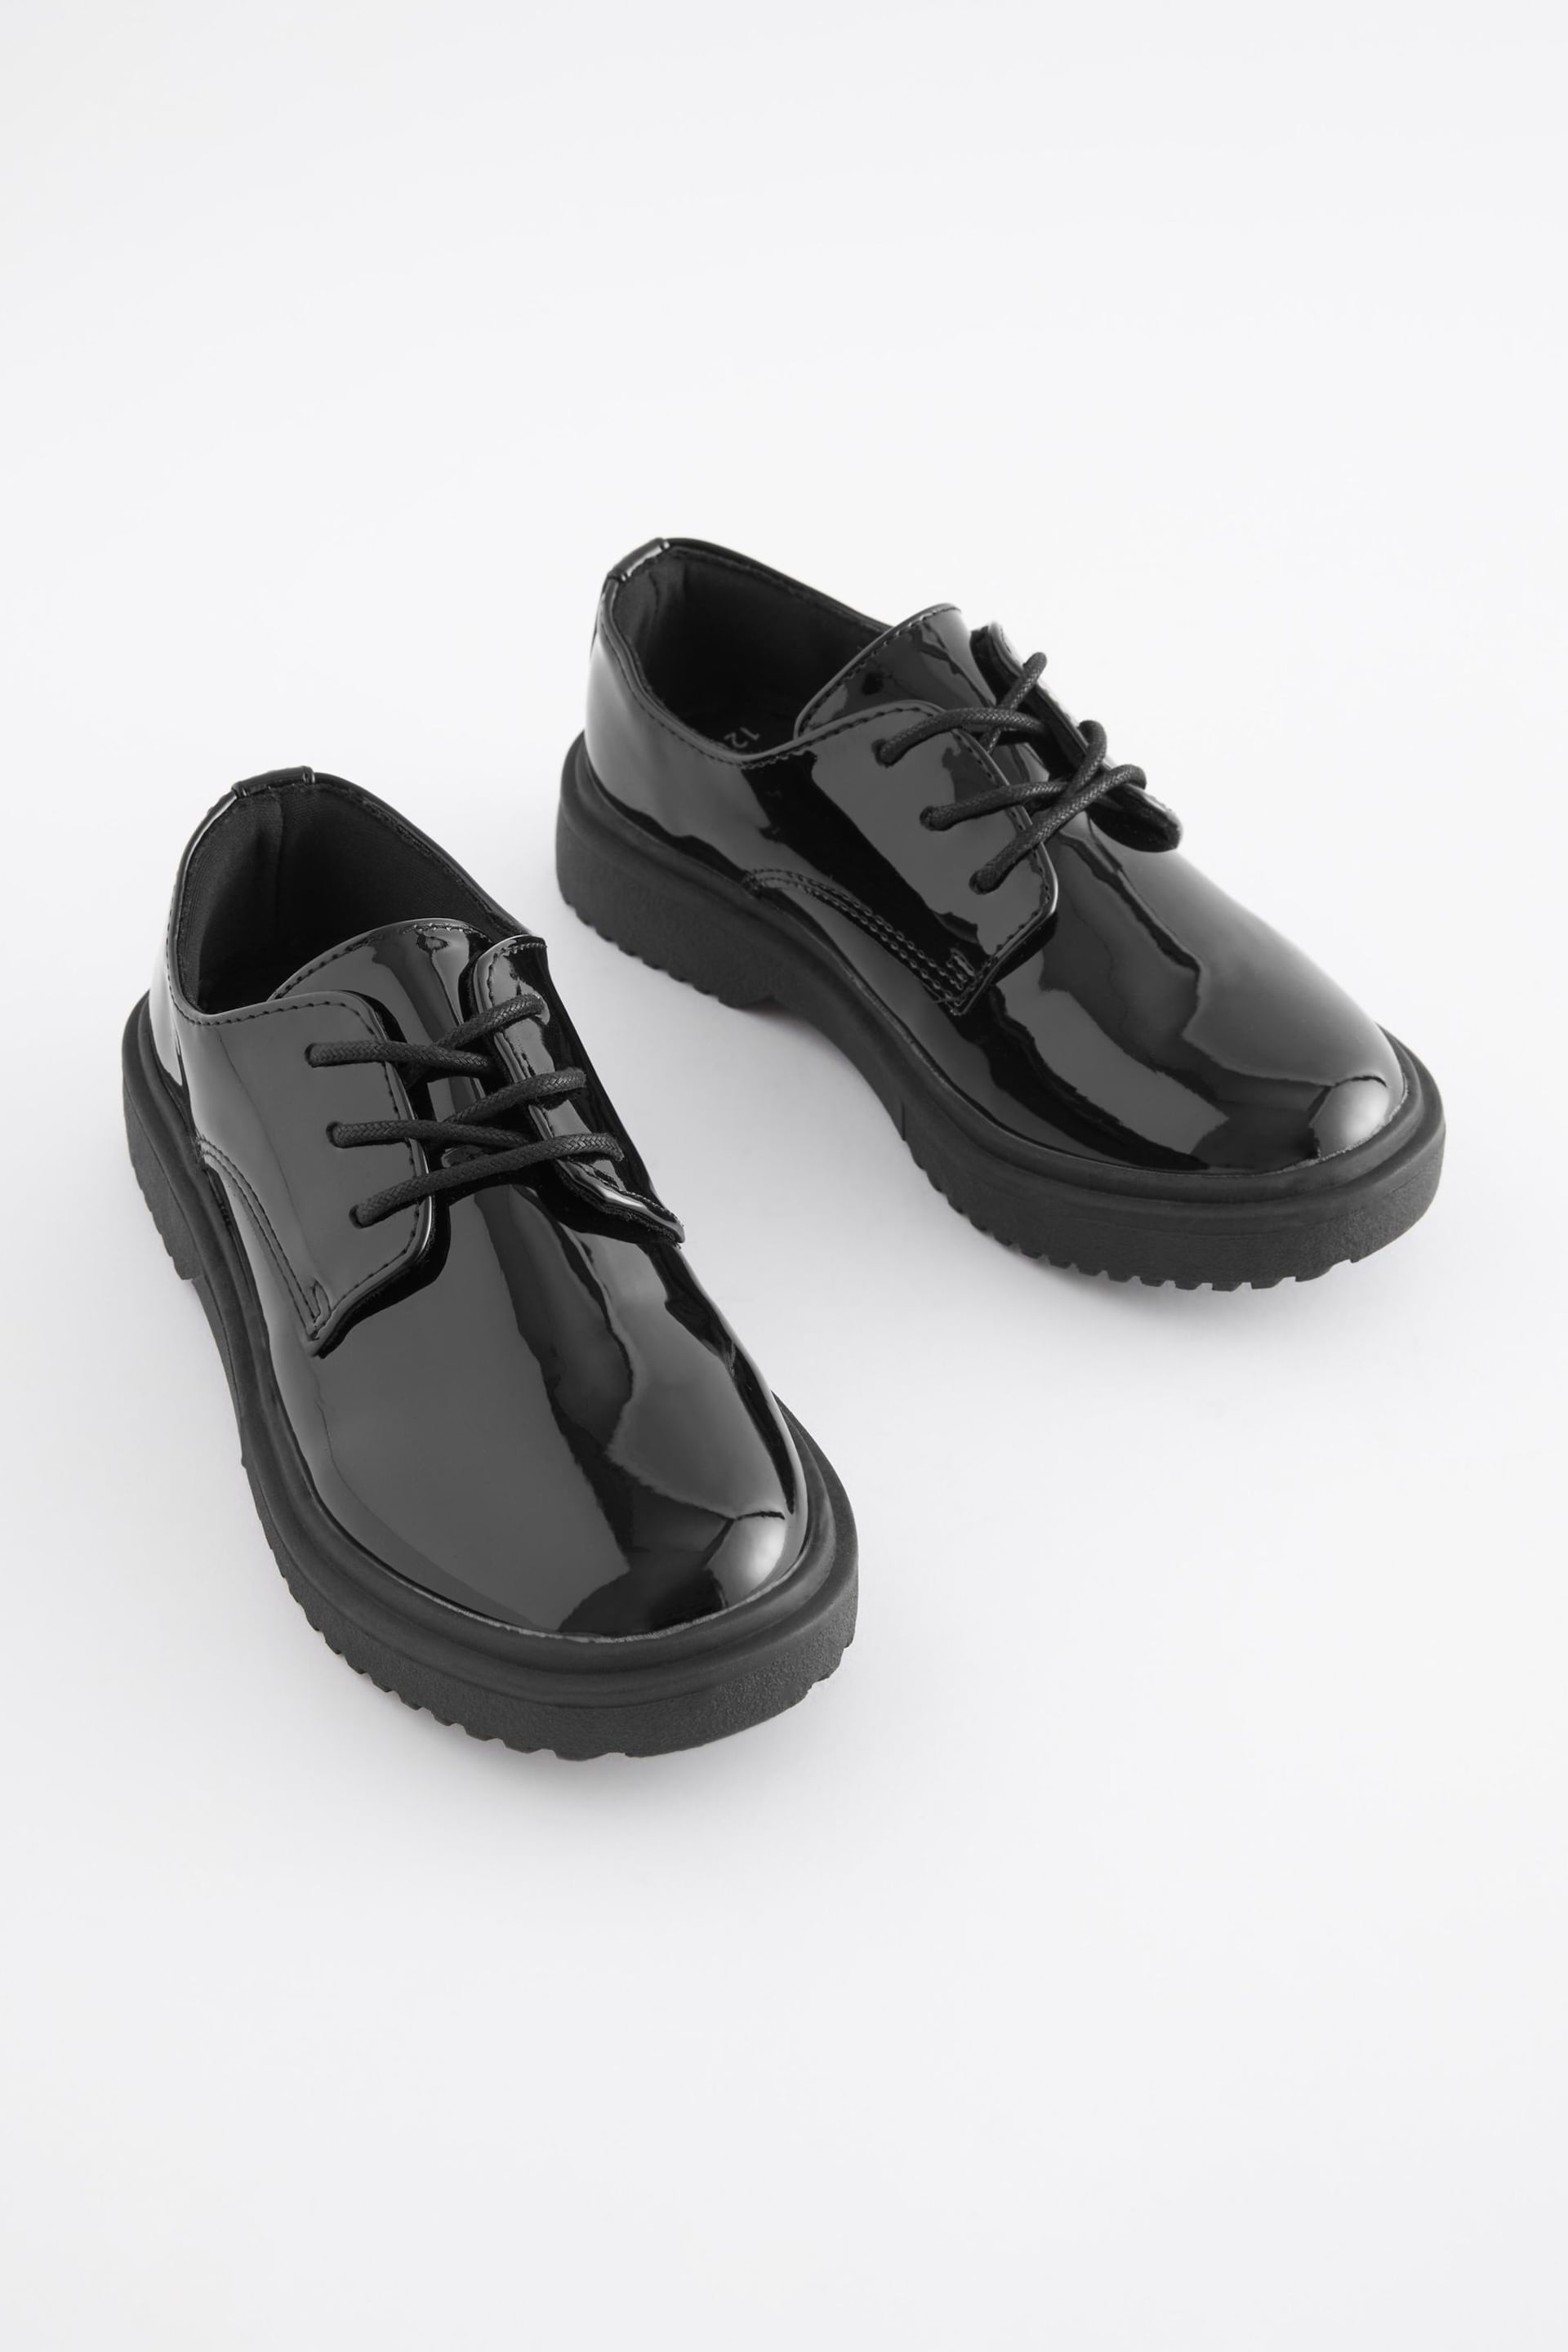 Black Patent Narrow Fit (E) School Chunky Lace-Up Shoes - Image 1 of 5